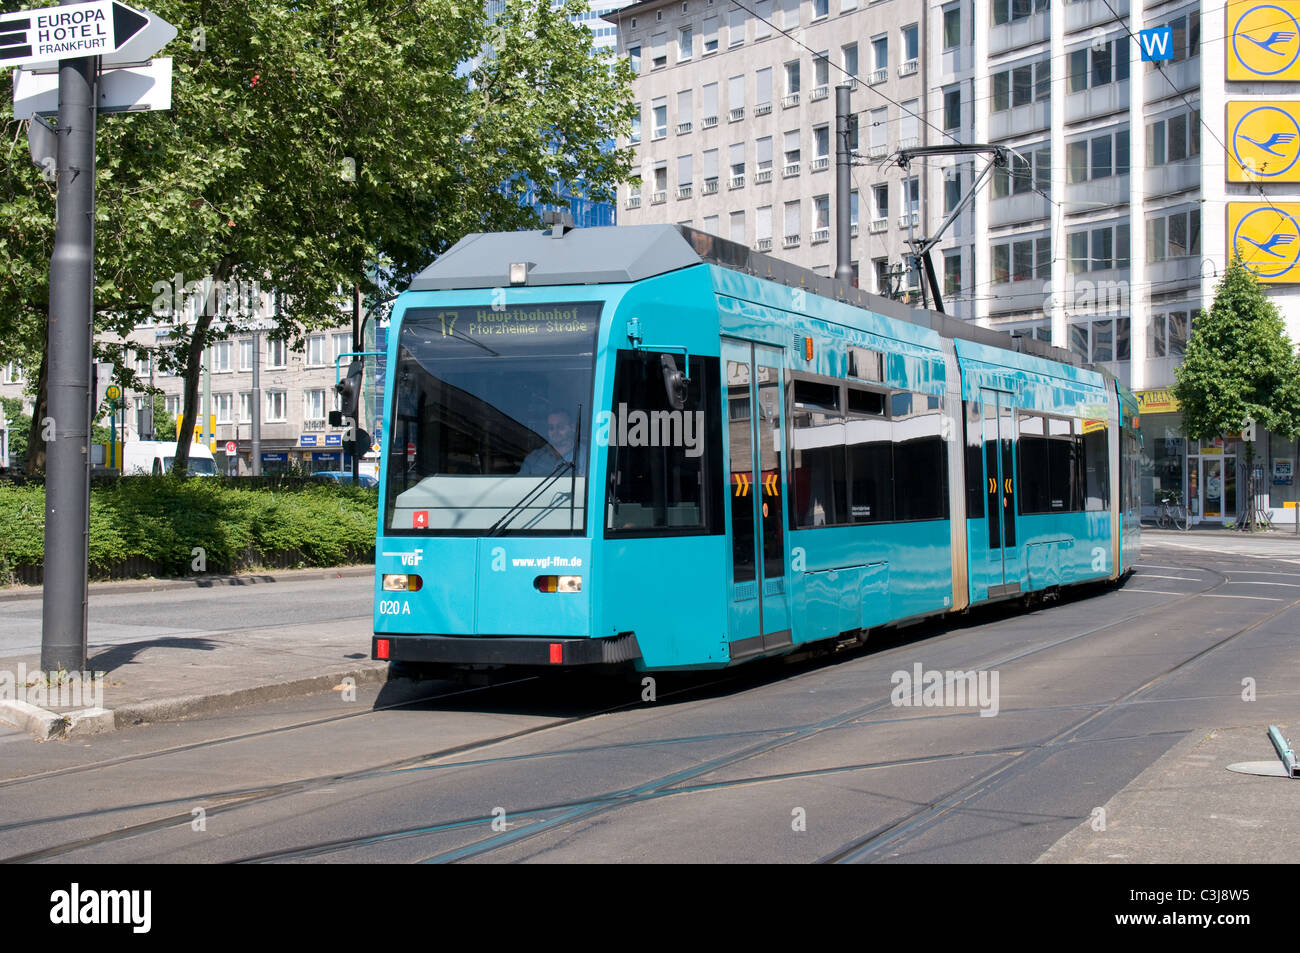 a modern low floor tram passes through the streets of Frank am main, Germany, near the main railway station. Stock Photo